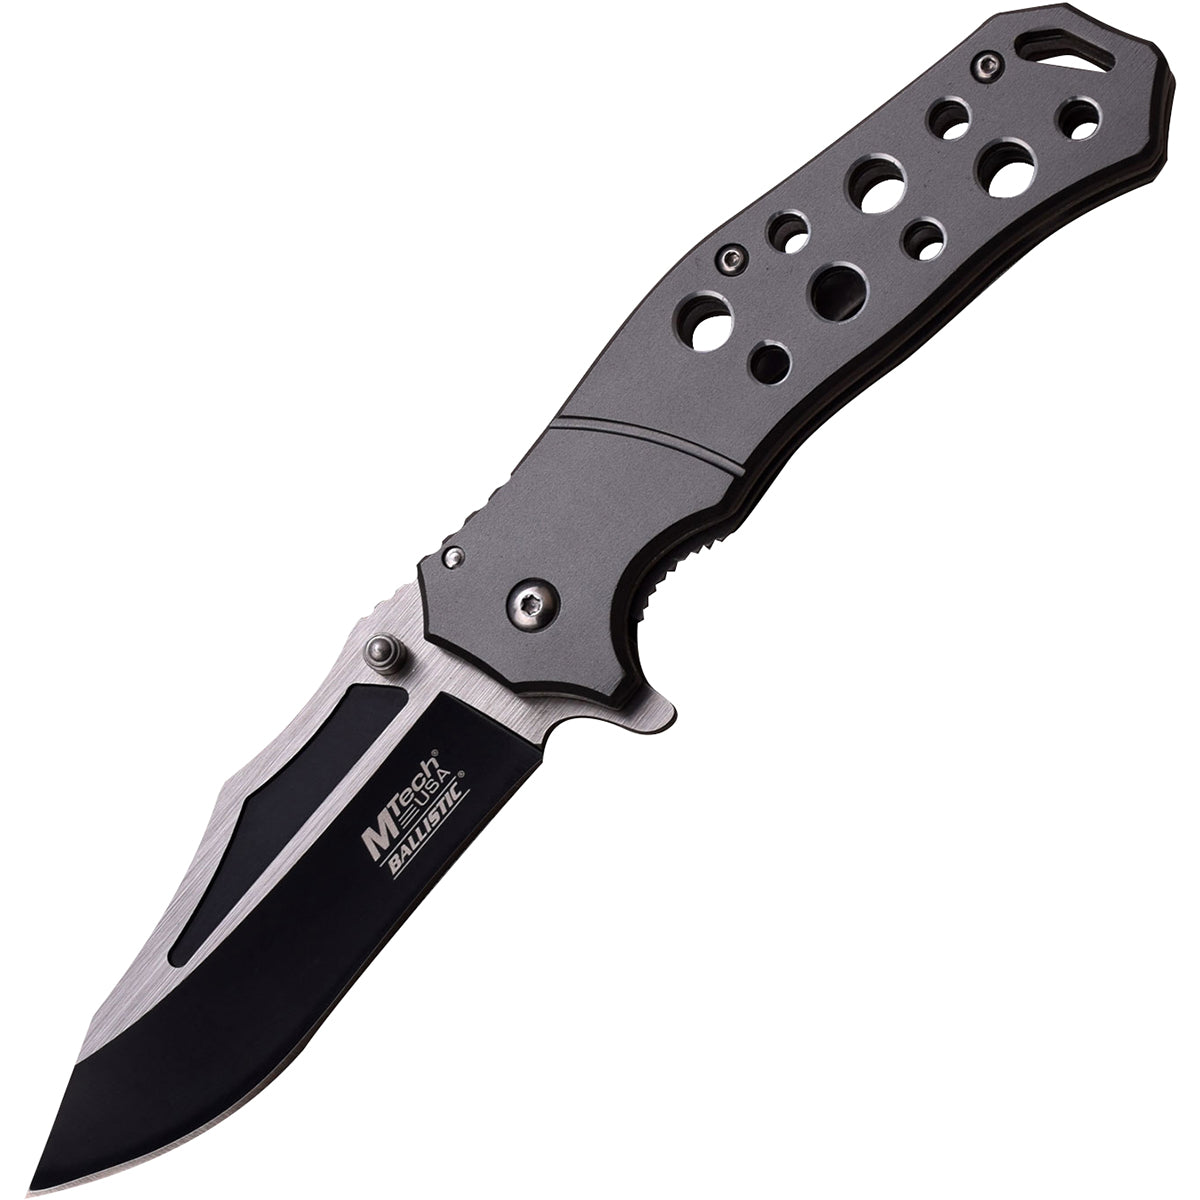 MTech USA Linerlock Spring Assisted Folding Knife, 3.5" Two-Tone Blade MT-A951GY M-Tech